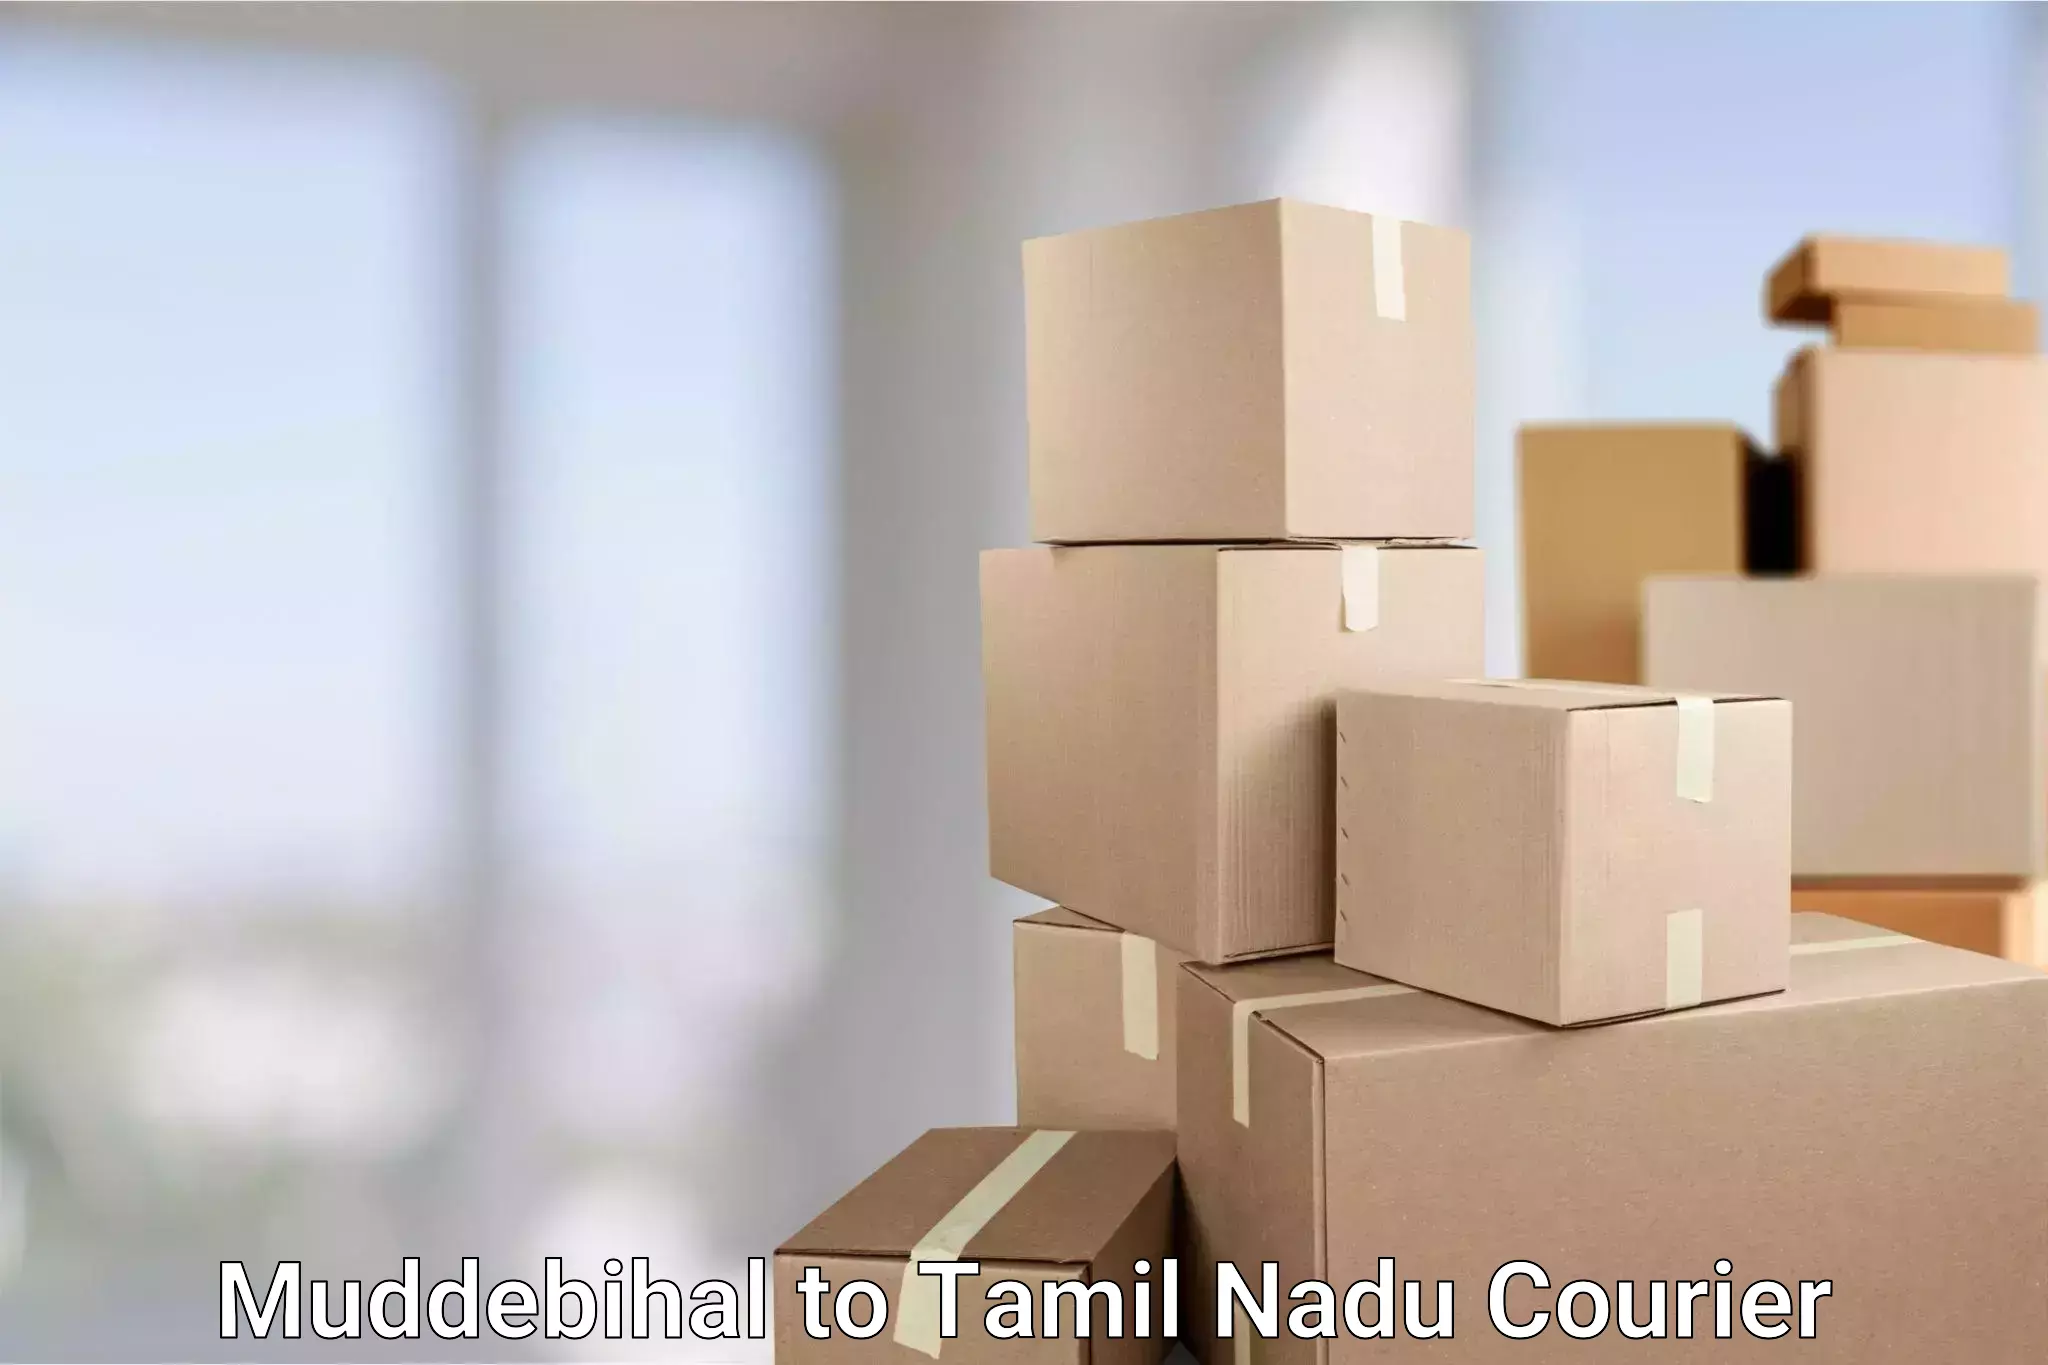 Fast shipping solutions in Muddebihal to Chennai Port